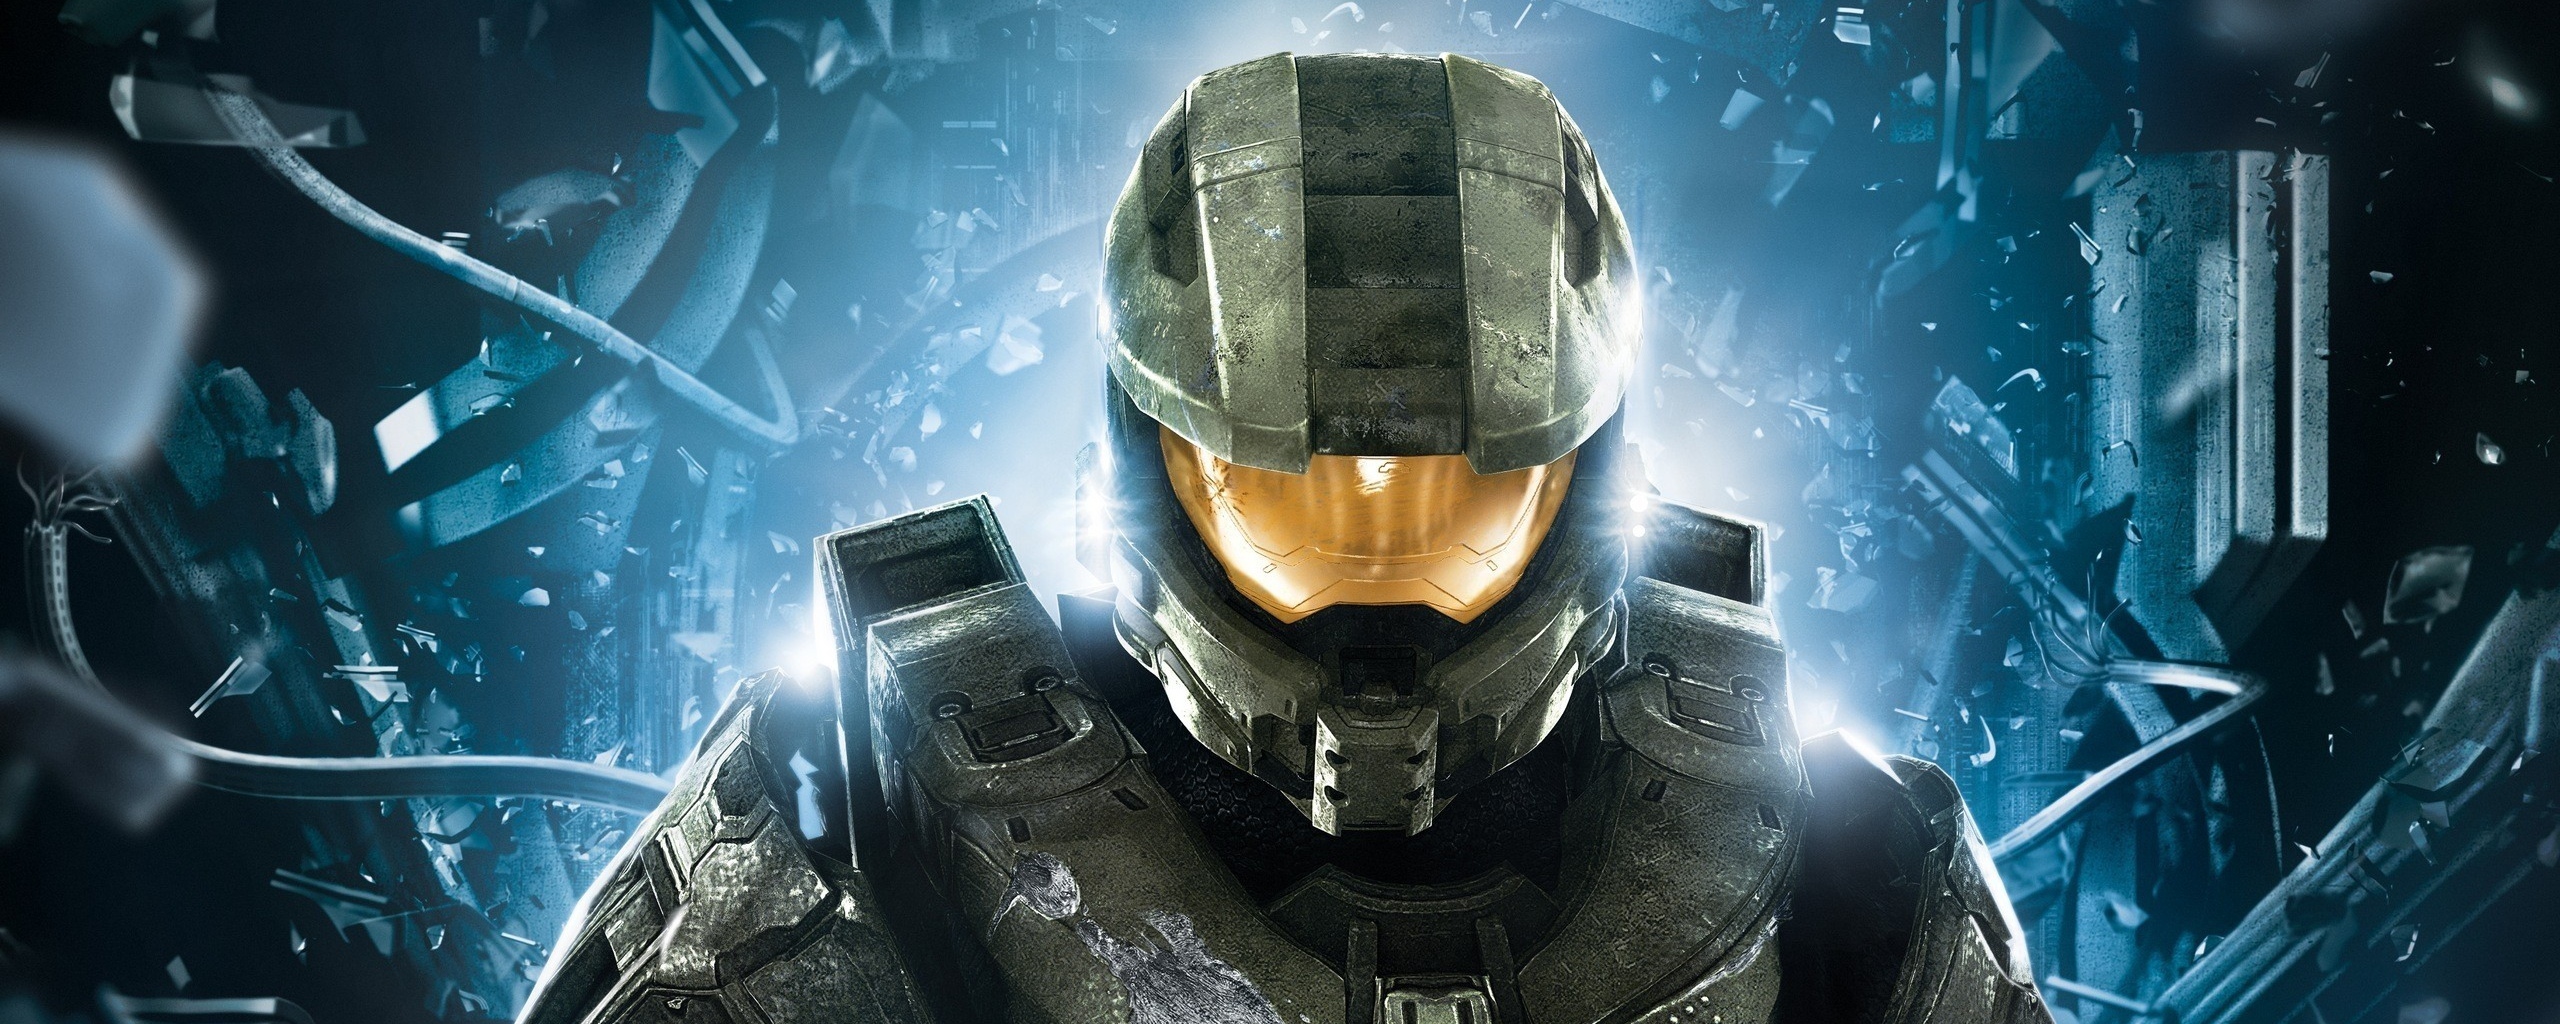 Wallpaper Halo Soldier Look Armor Light Dual Monitor